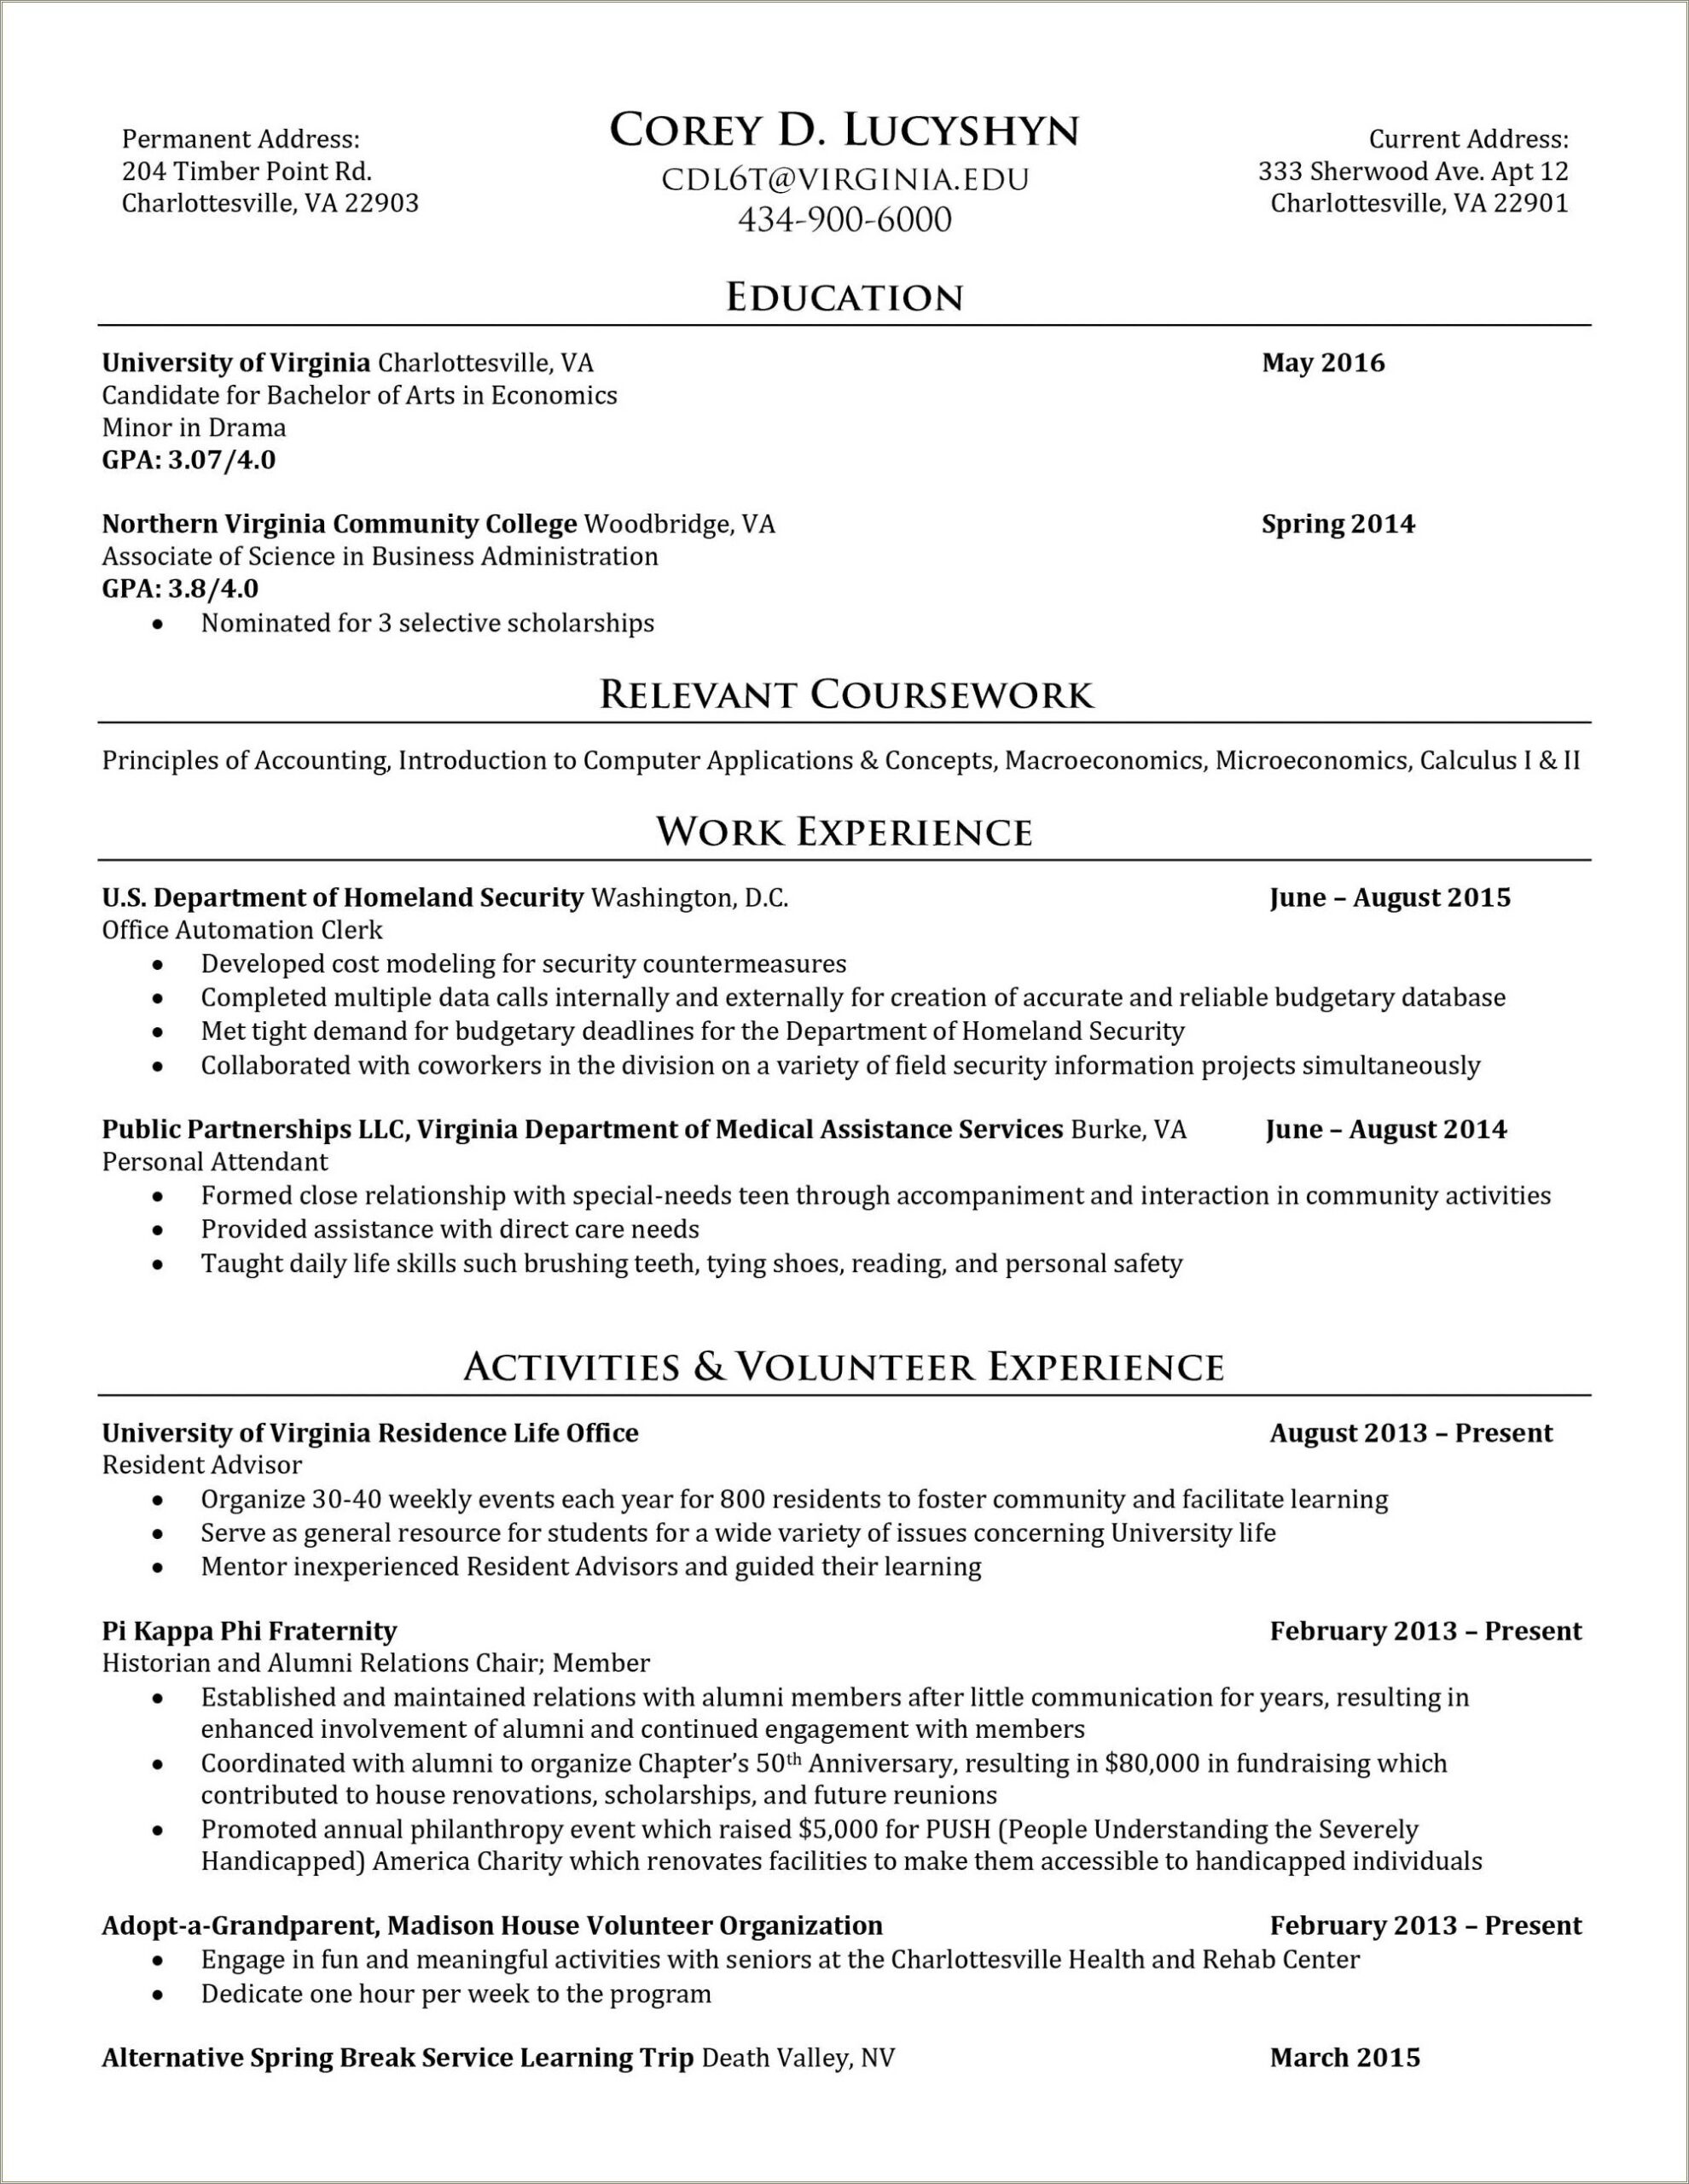 Alternative To Using Experience In Resume